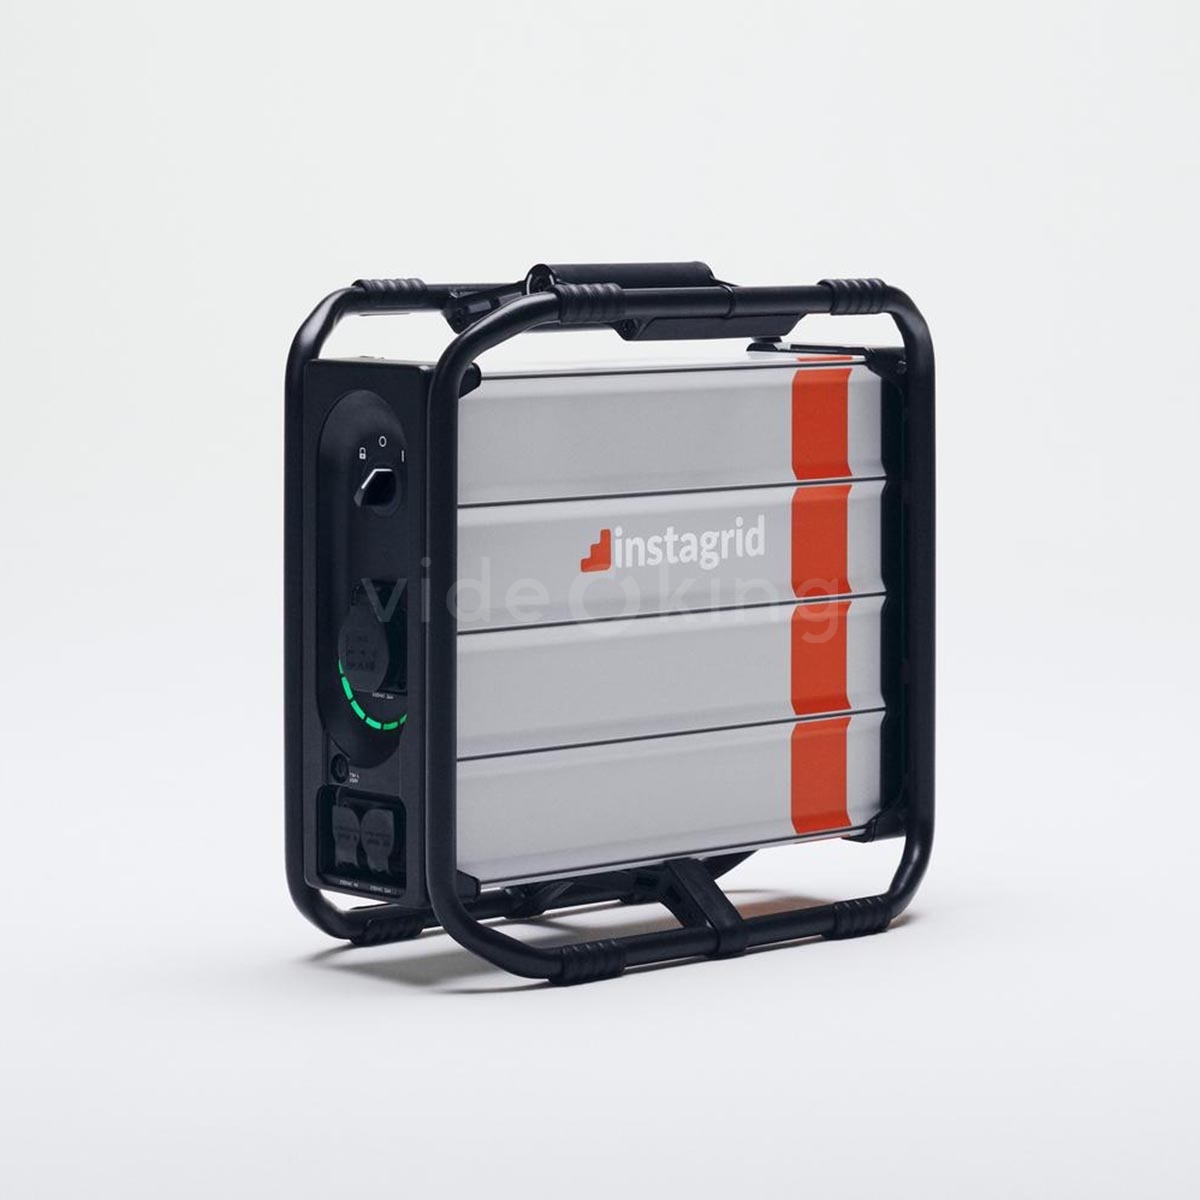 Instagrid ONE Max 3600W Portable Power Station